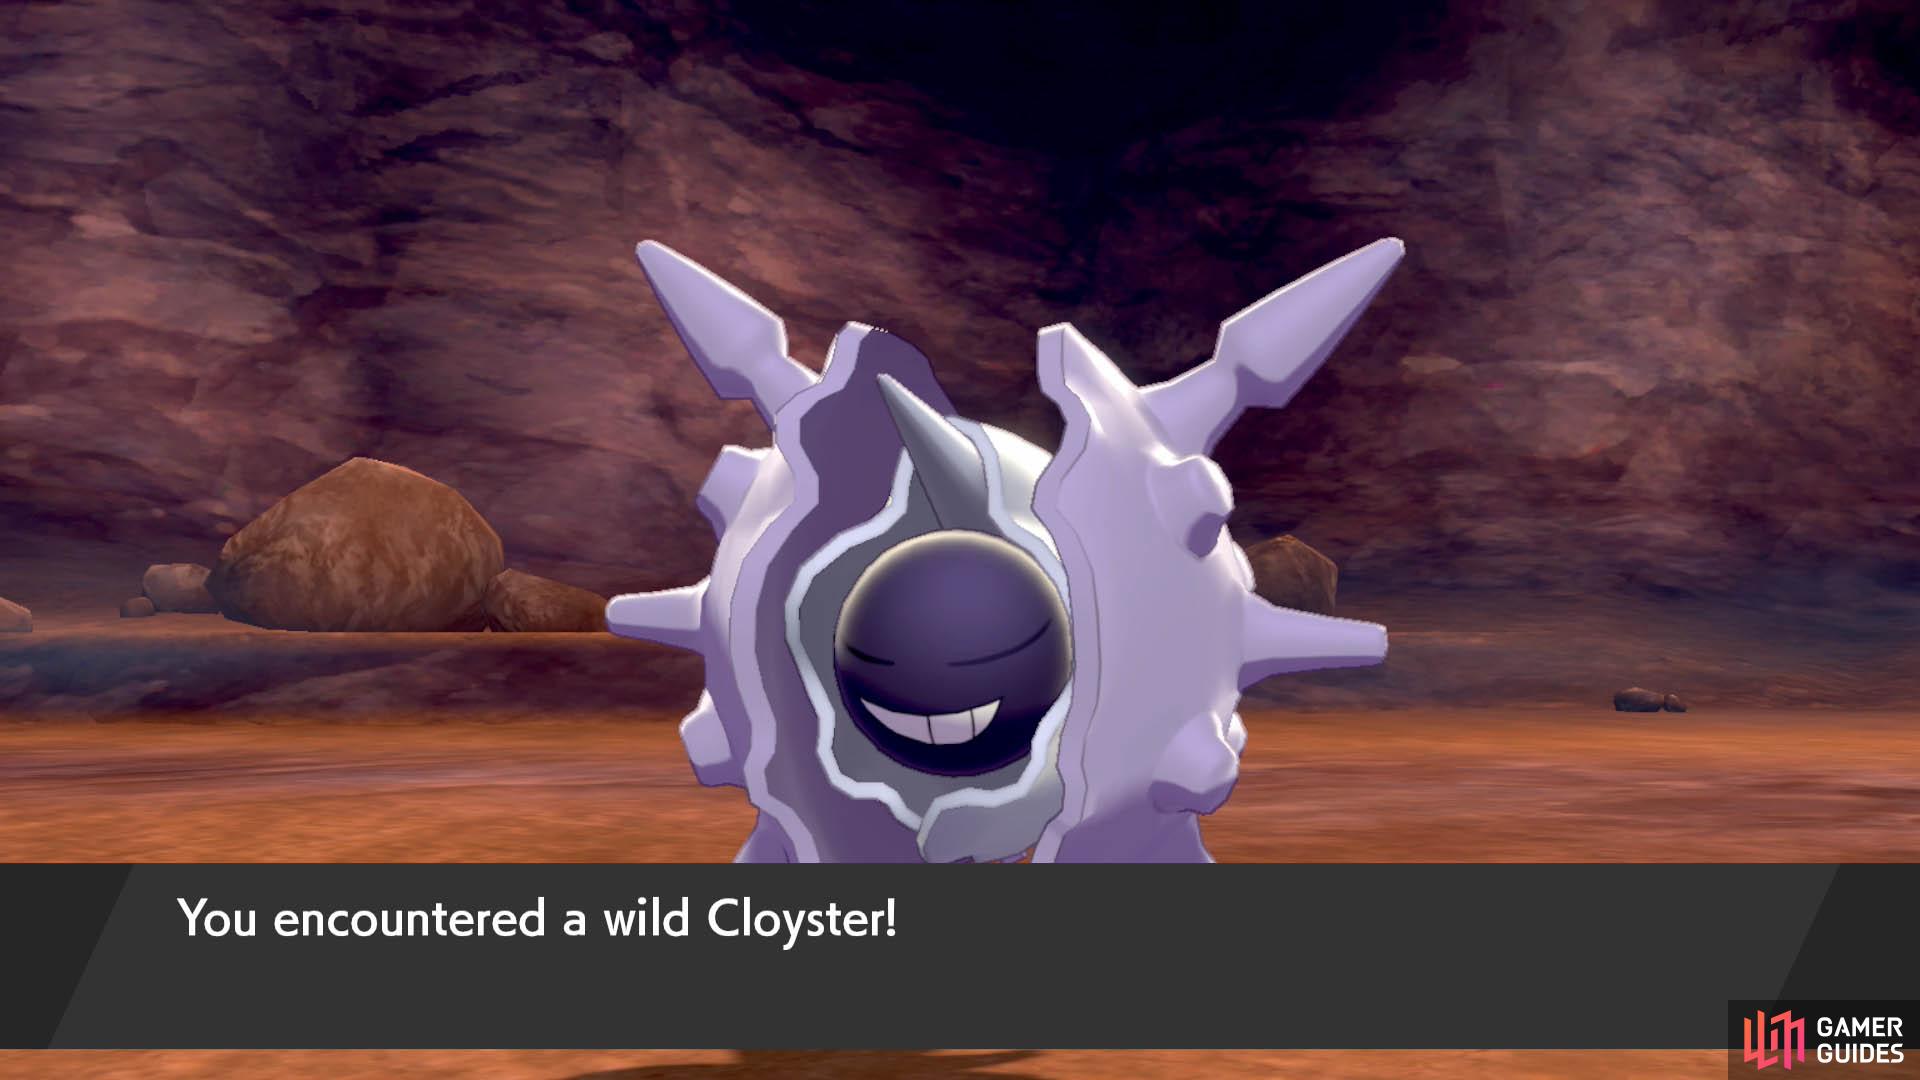 No, Cloyster, don't close your eyes when we're taking a photo!